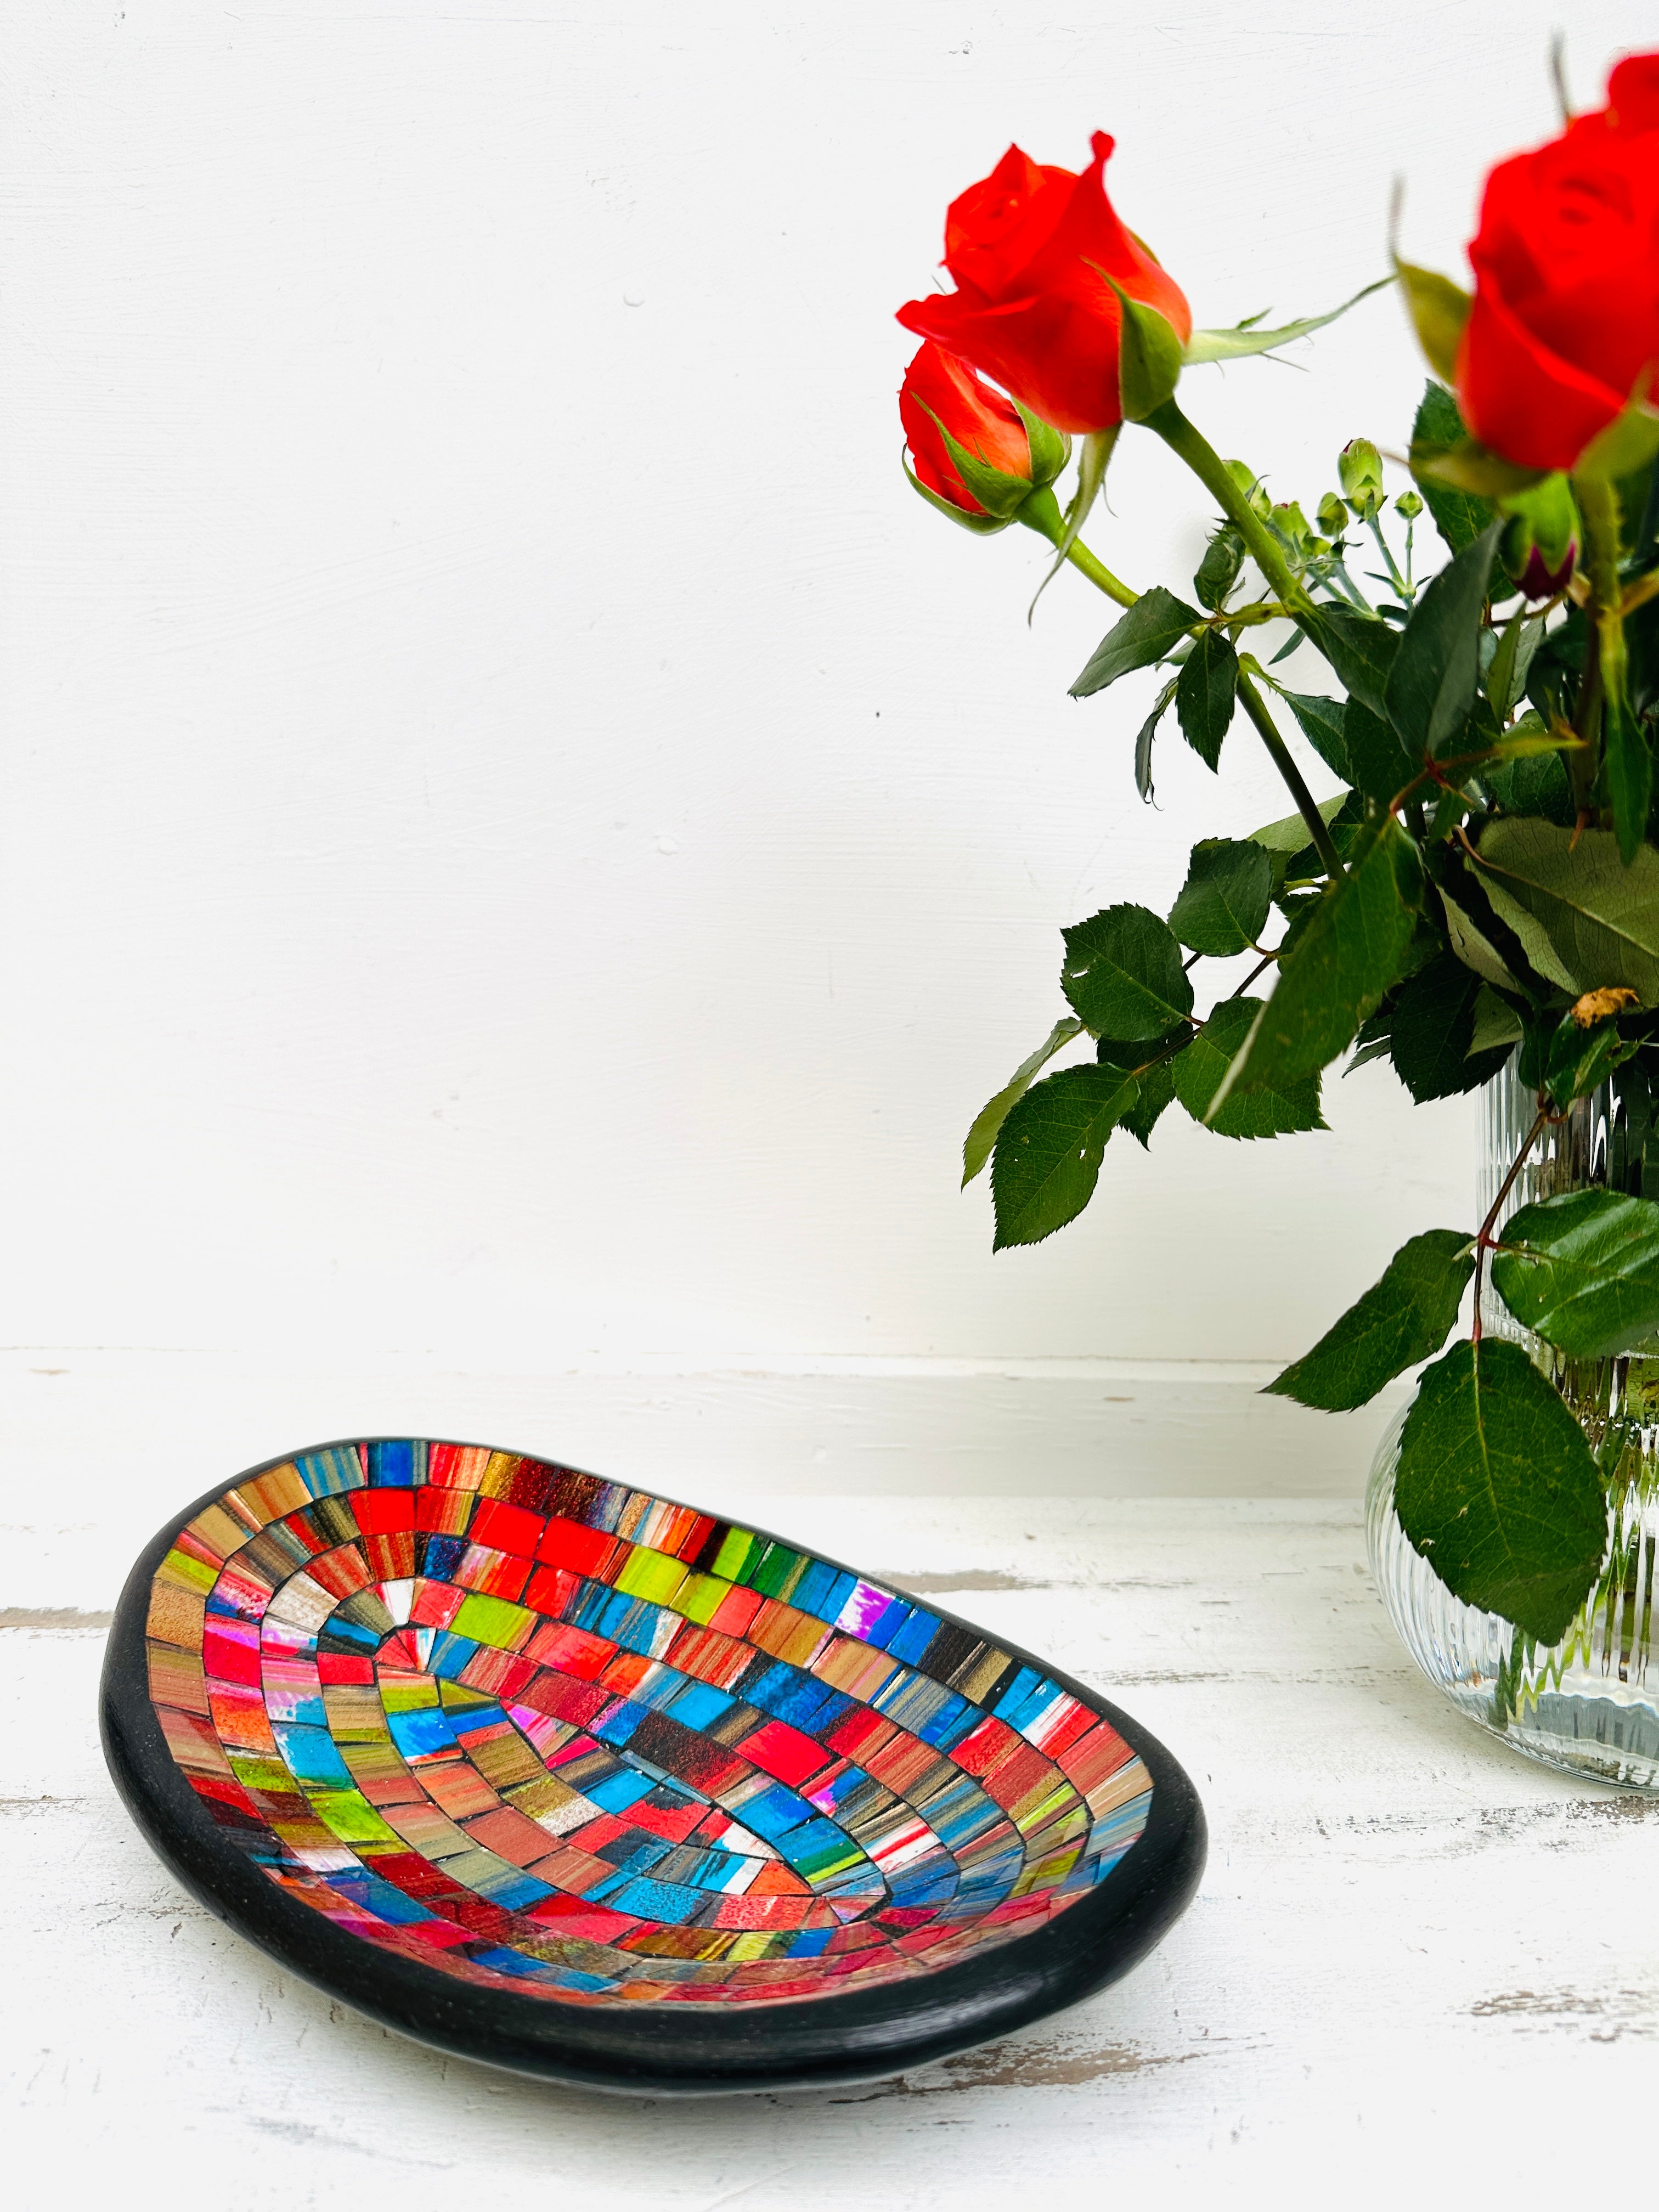 display view of mosaic oval bowl next to a vase of flowers